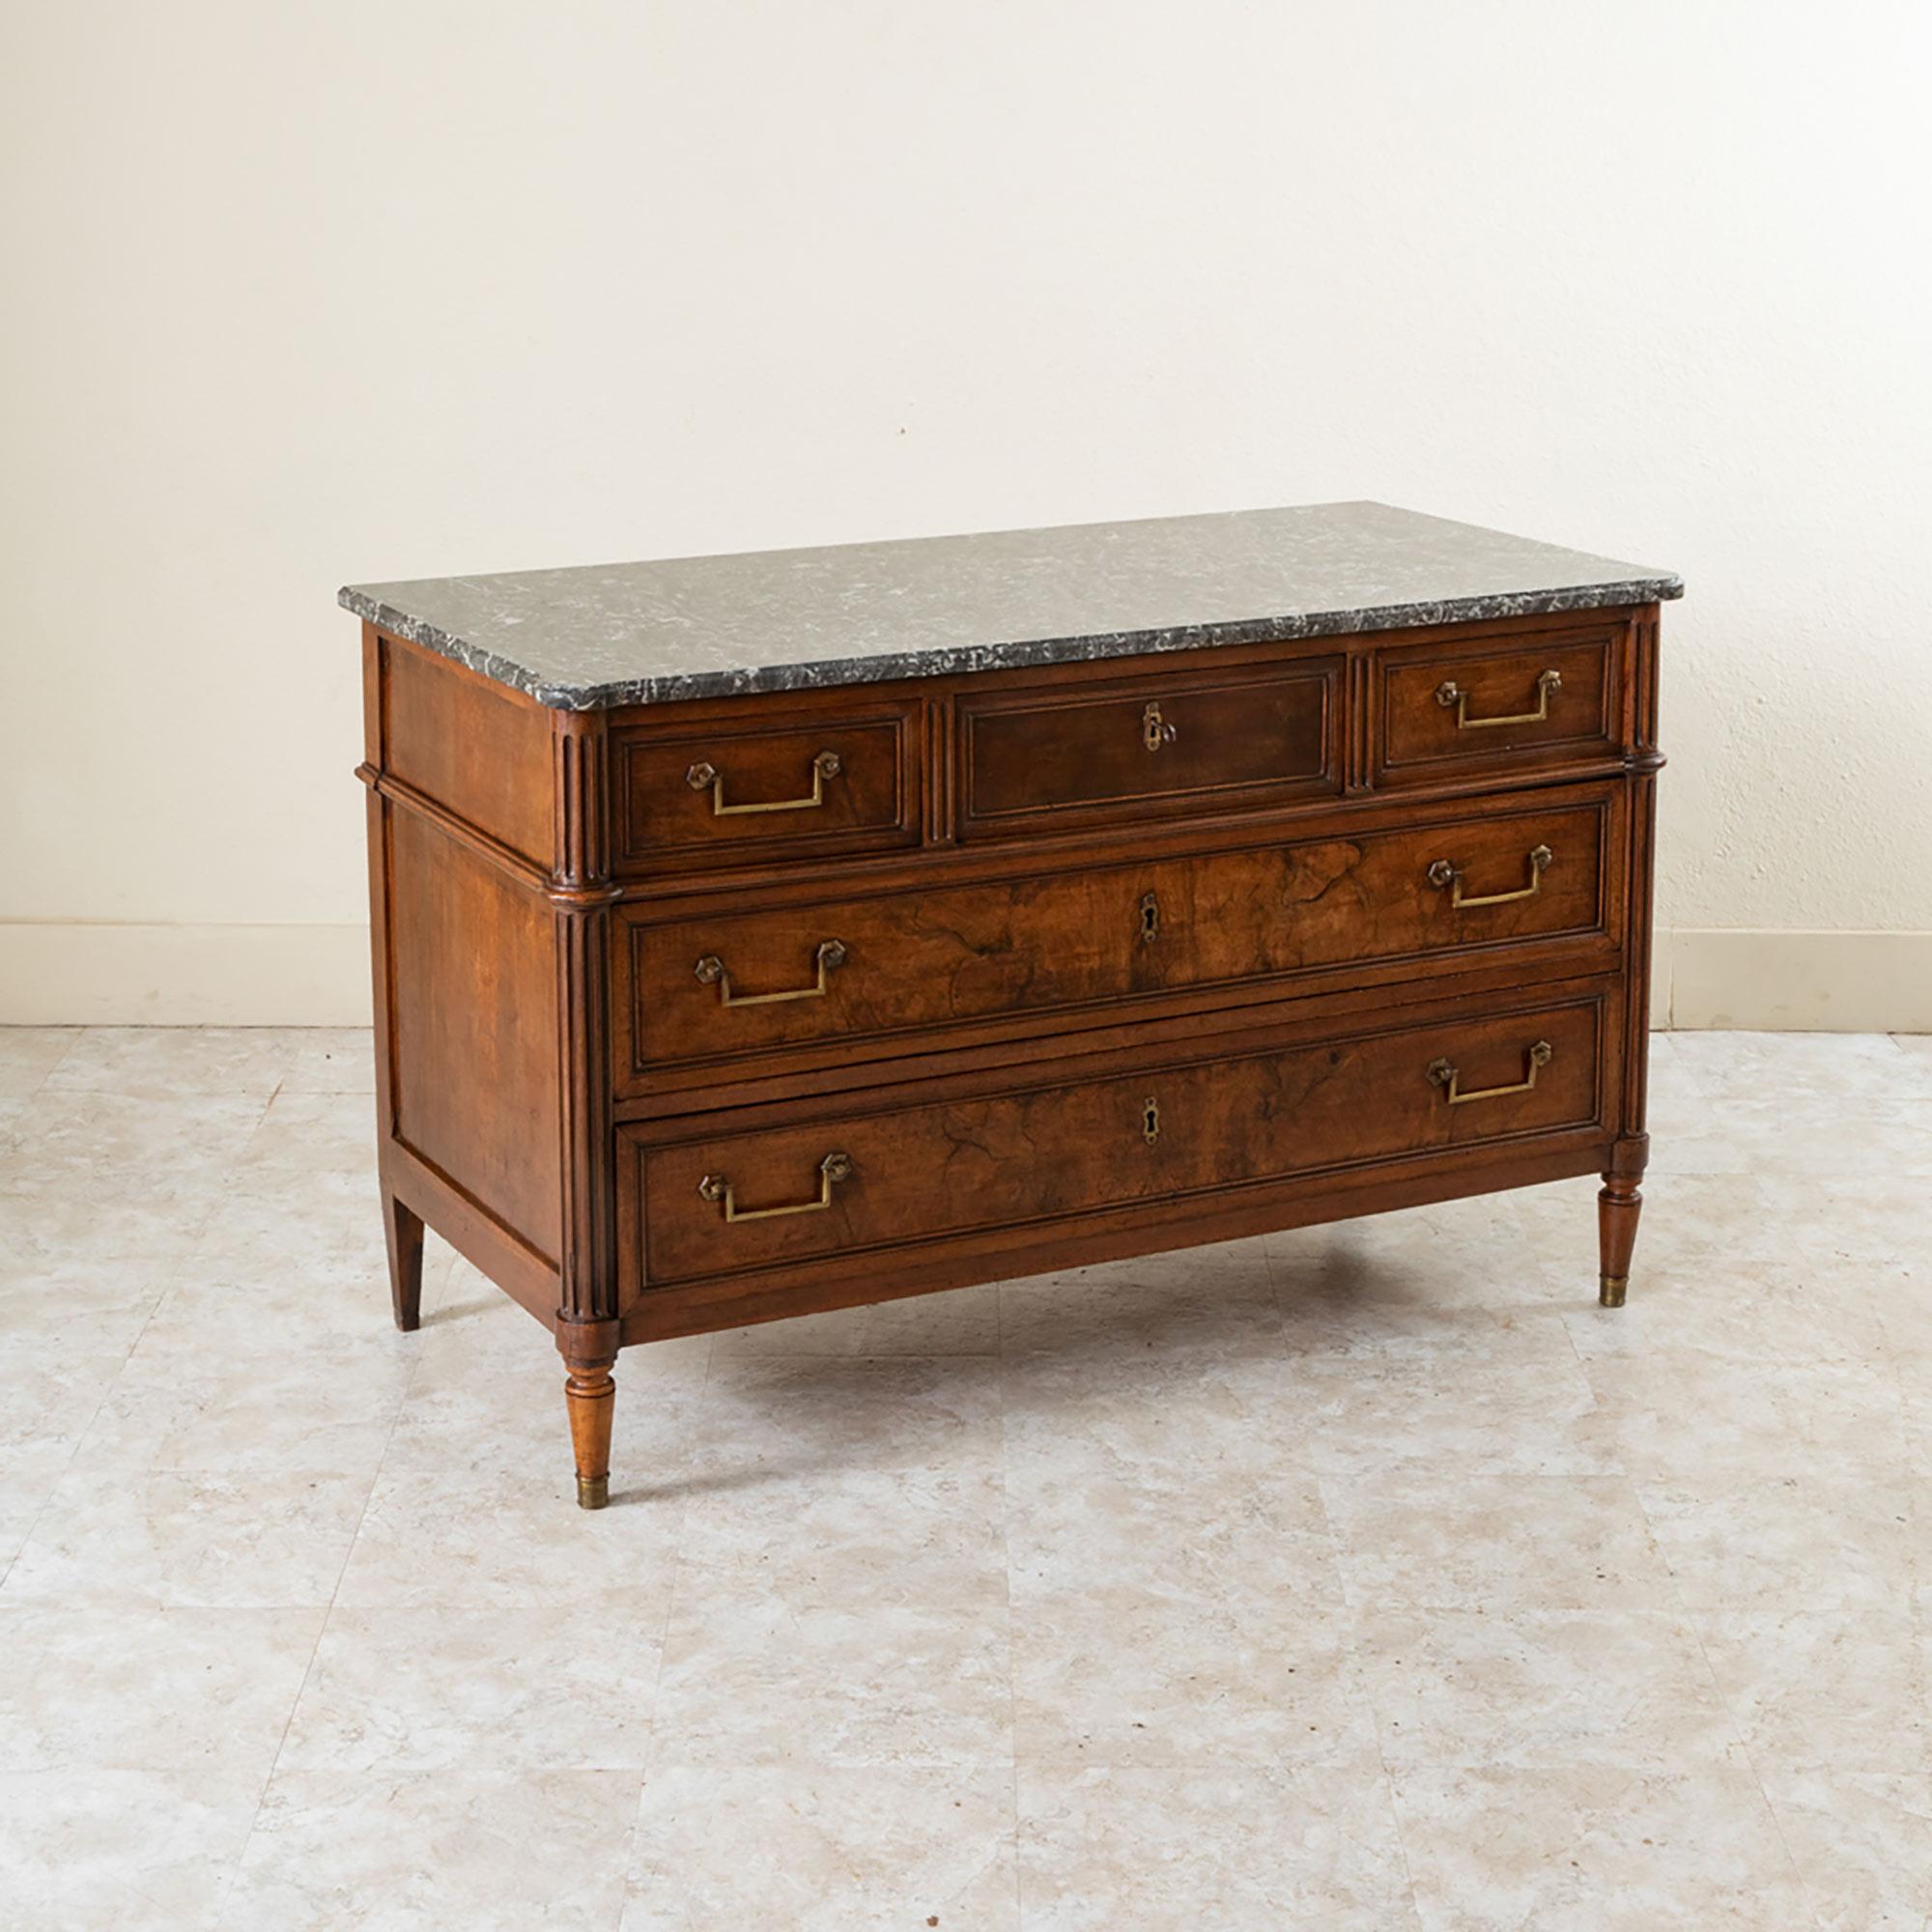 Mid-19th Century French Louis XVI Style Book Matched Walnut and Marble Chest In Good Condition For Sale In Fayetteville, AR